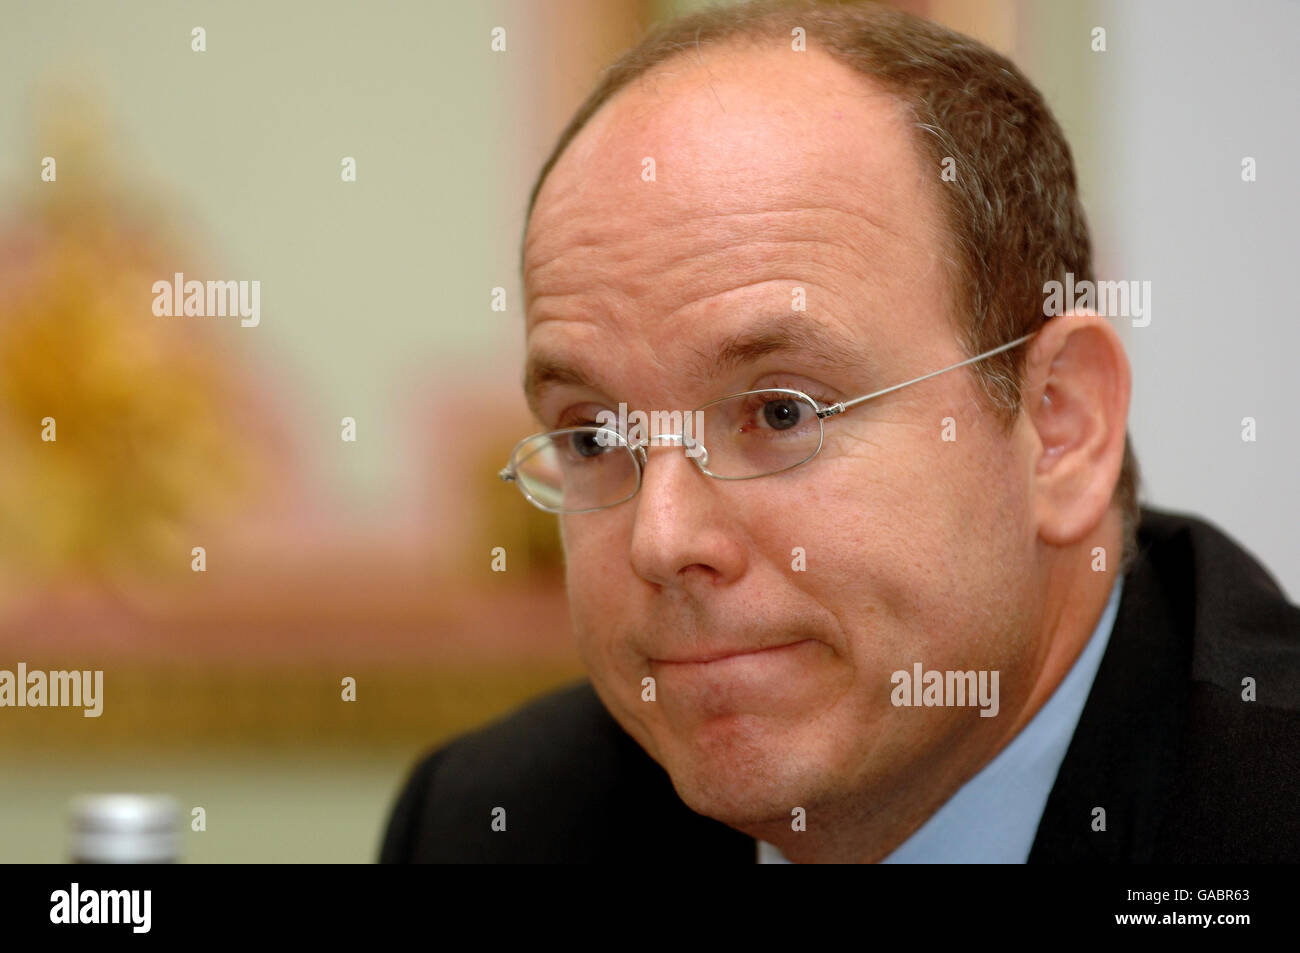 Prince Albert II of Monaco launches the UK branch of the charitable Prince Albert II of Monaco Foundation, which aims to tackle climate change, biodiversity loss and water issues, at the Ritz Hotel, Piccadilly, London. Stock Photo